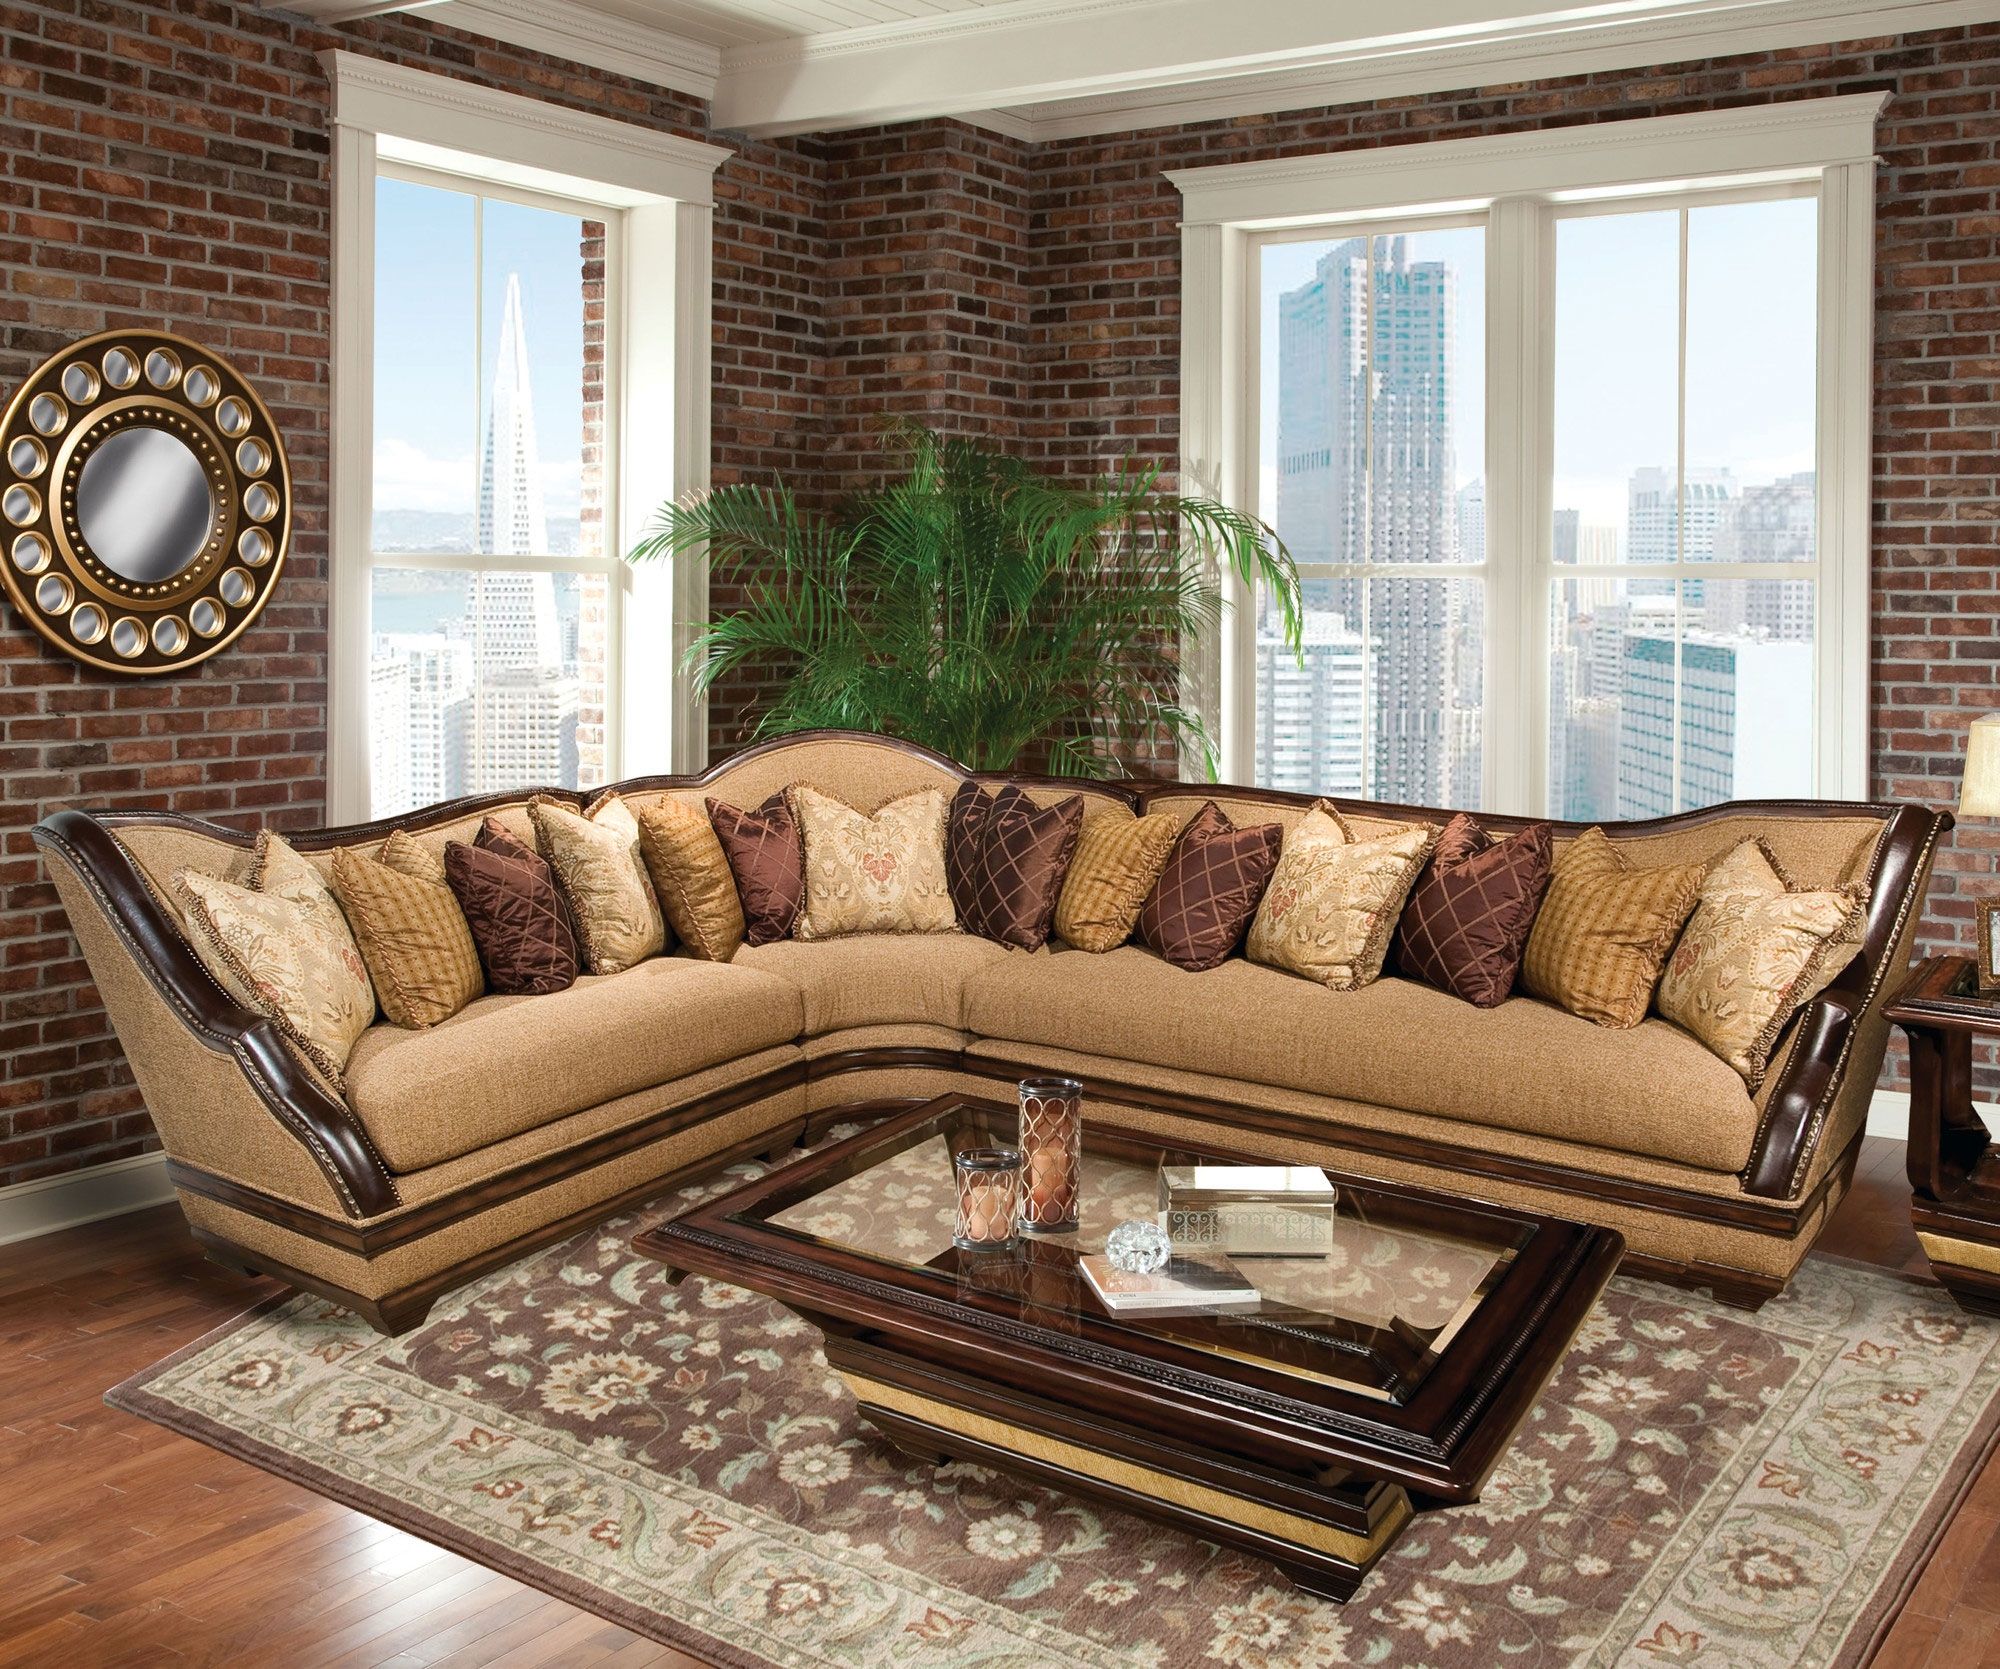 Luxury Sectional Sofa Hereo Sofa In Expensive Sectional Sofas (View 6 of 15)